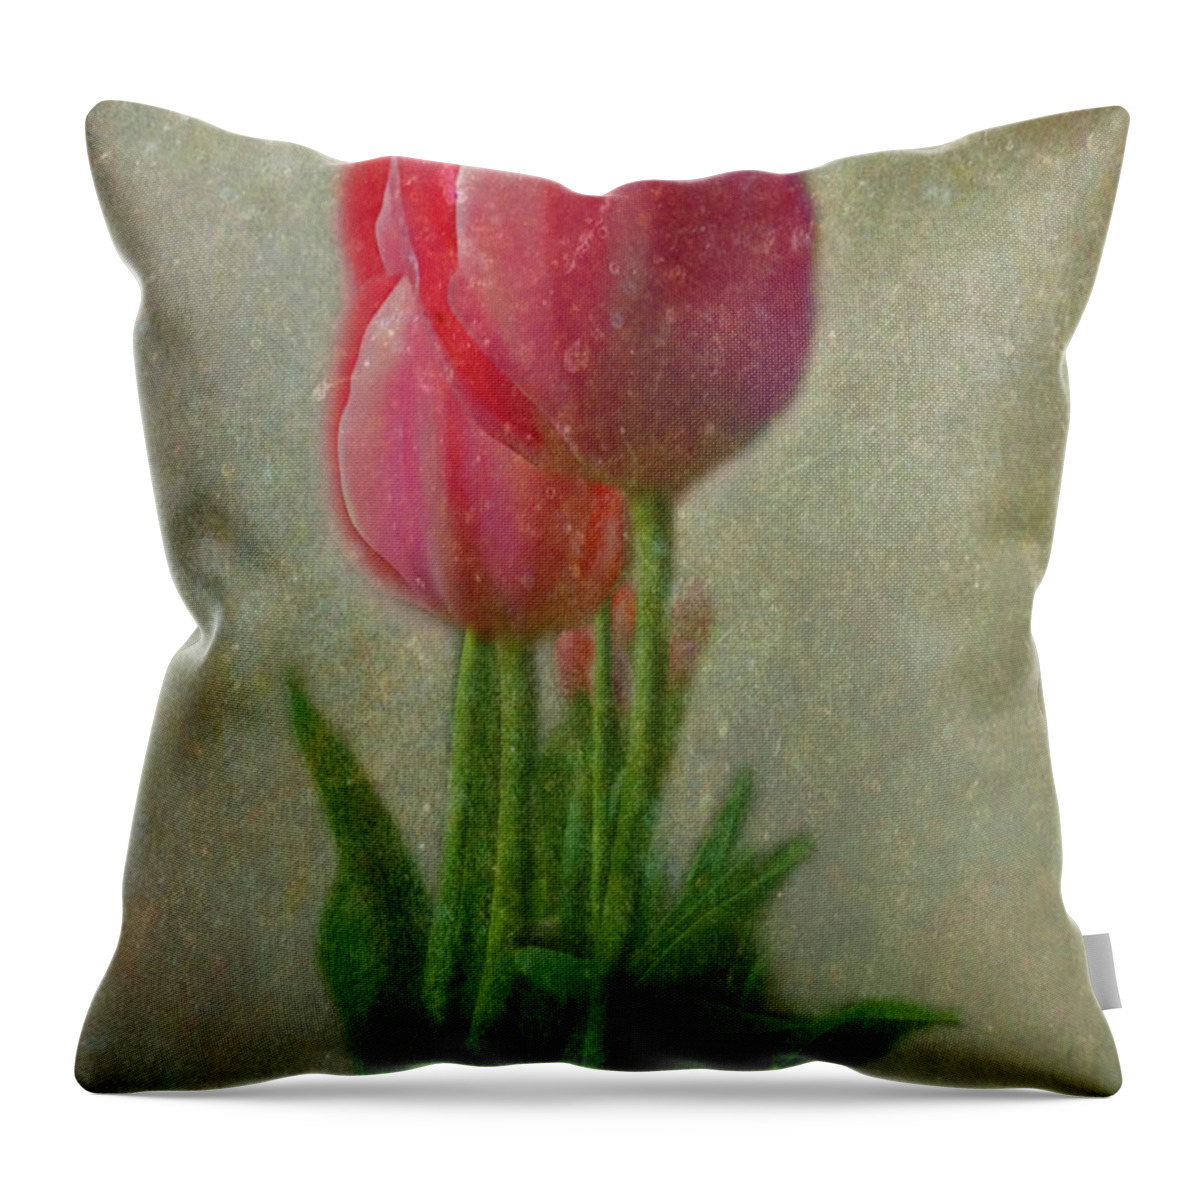 Tulip Throw Pillow featuring the photograph Pink Tulips by Yvonne Johnstone